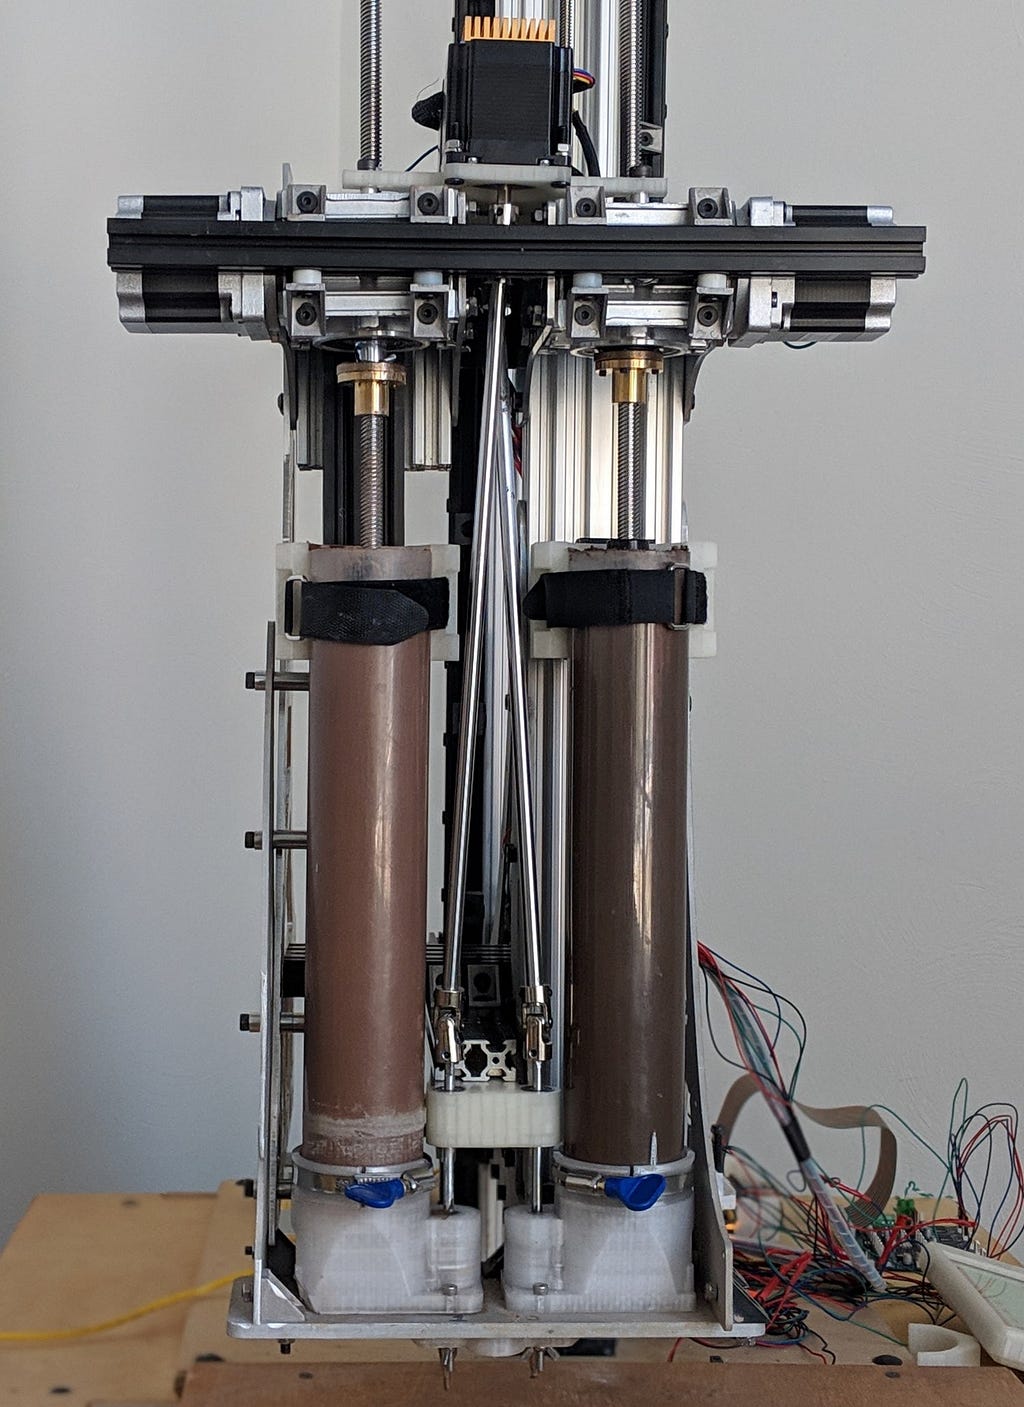 Image of our experimental dual extruder machine, spring 2019